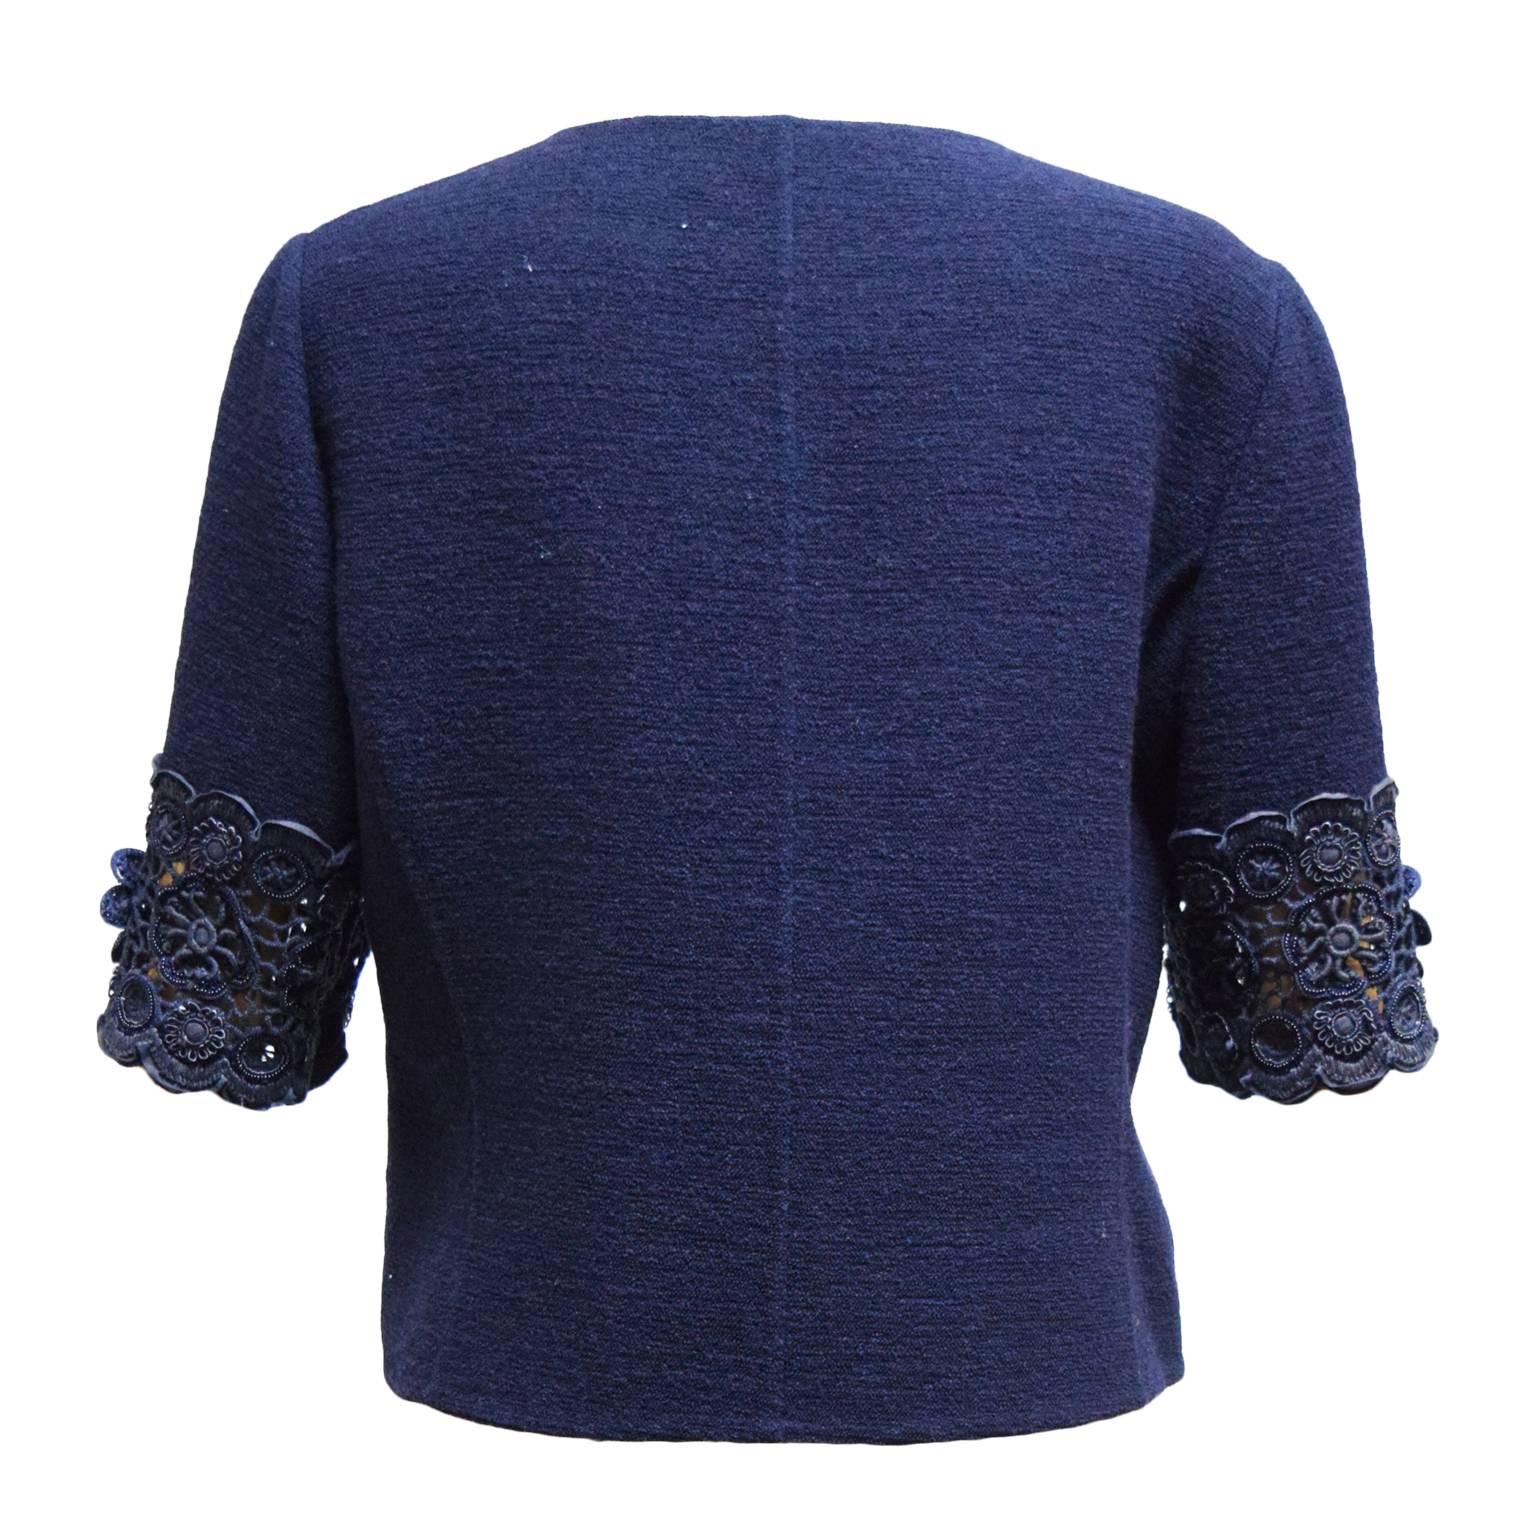 This Oscar de la Renta cardigan is navy blue wool and has floral embroidery along the bust and the bodice. It is short sleeved and has snap closures. 